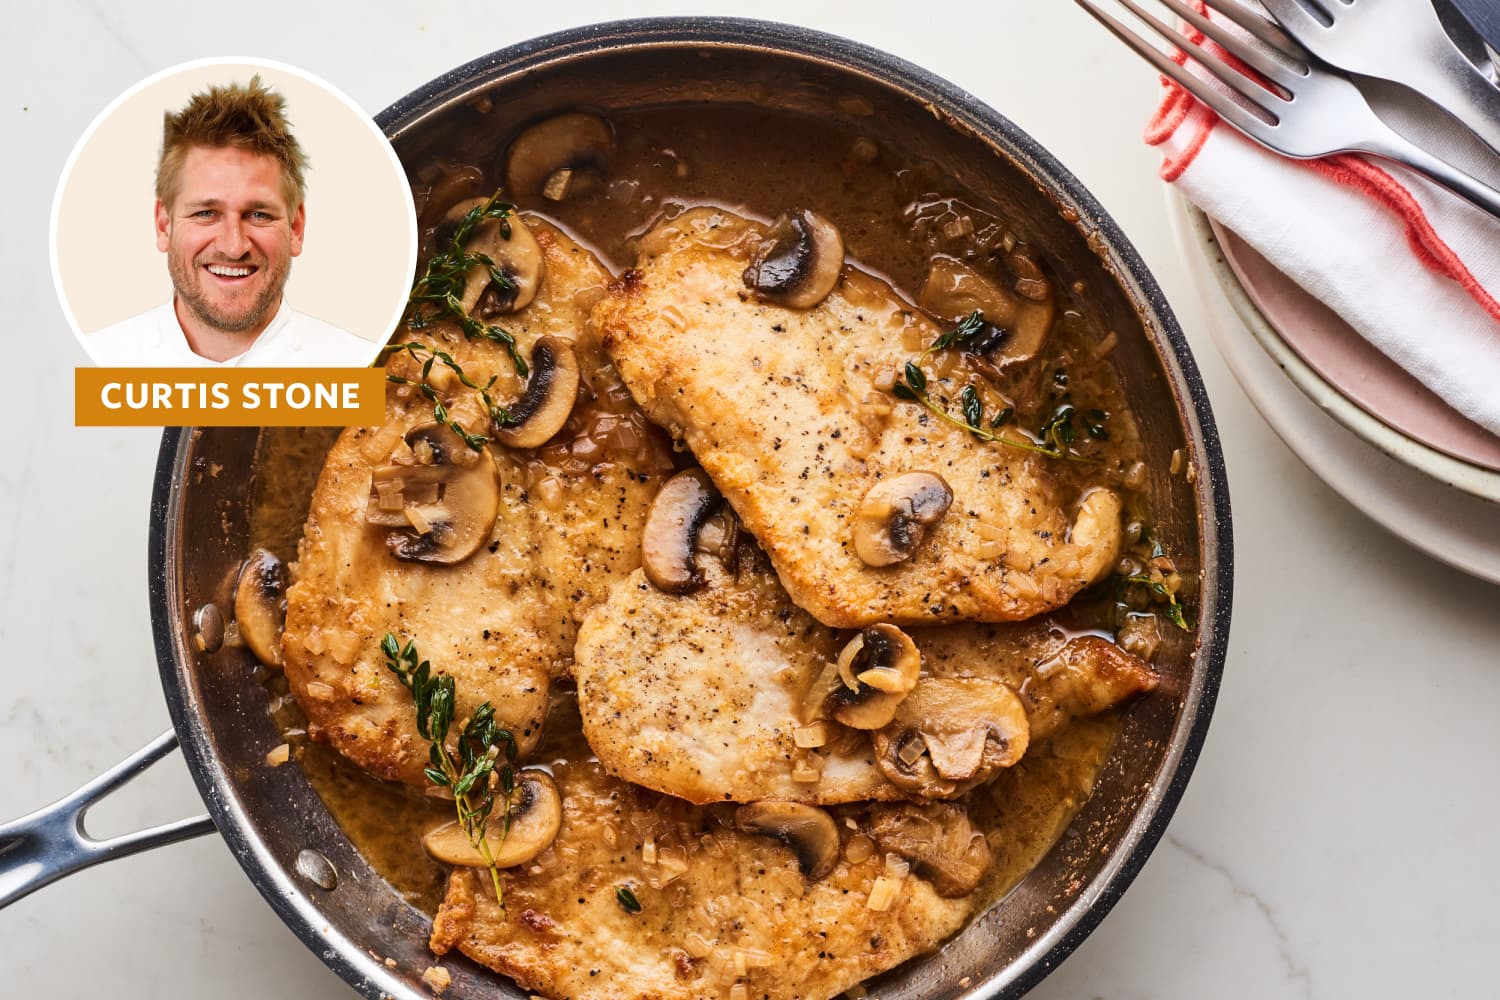 I Tried Curtis Stone's Chicken Marsala - Here's My Honest Review